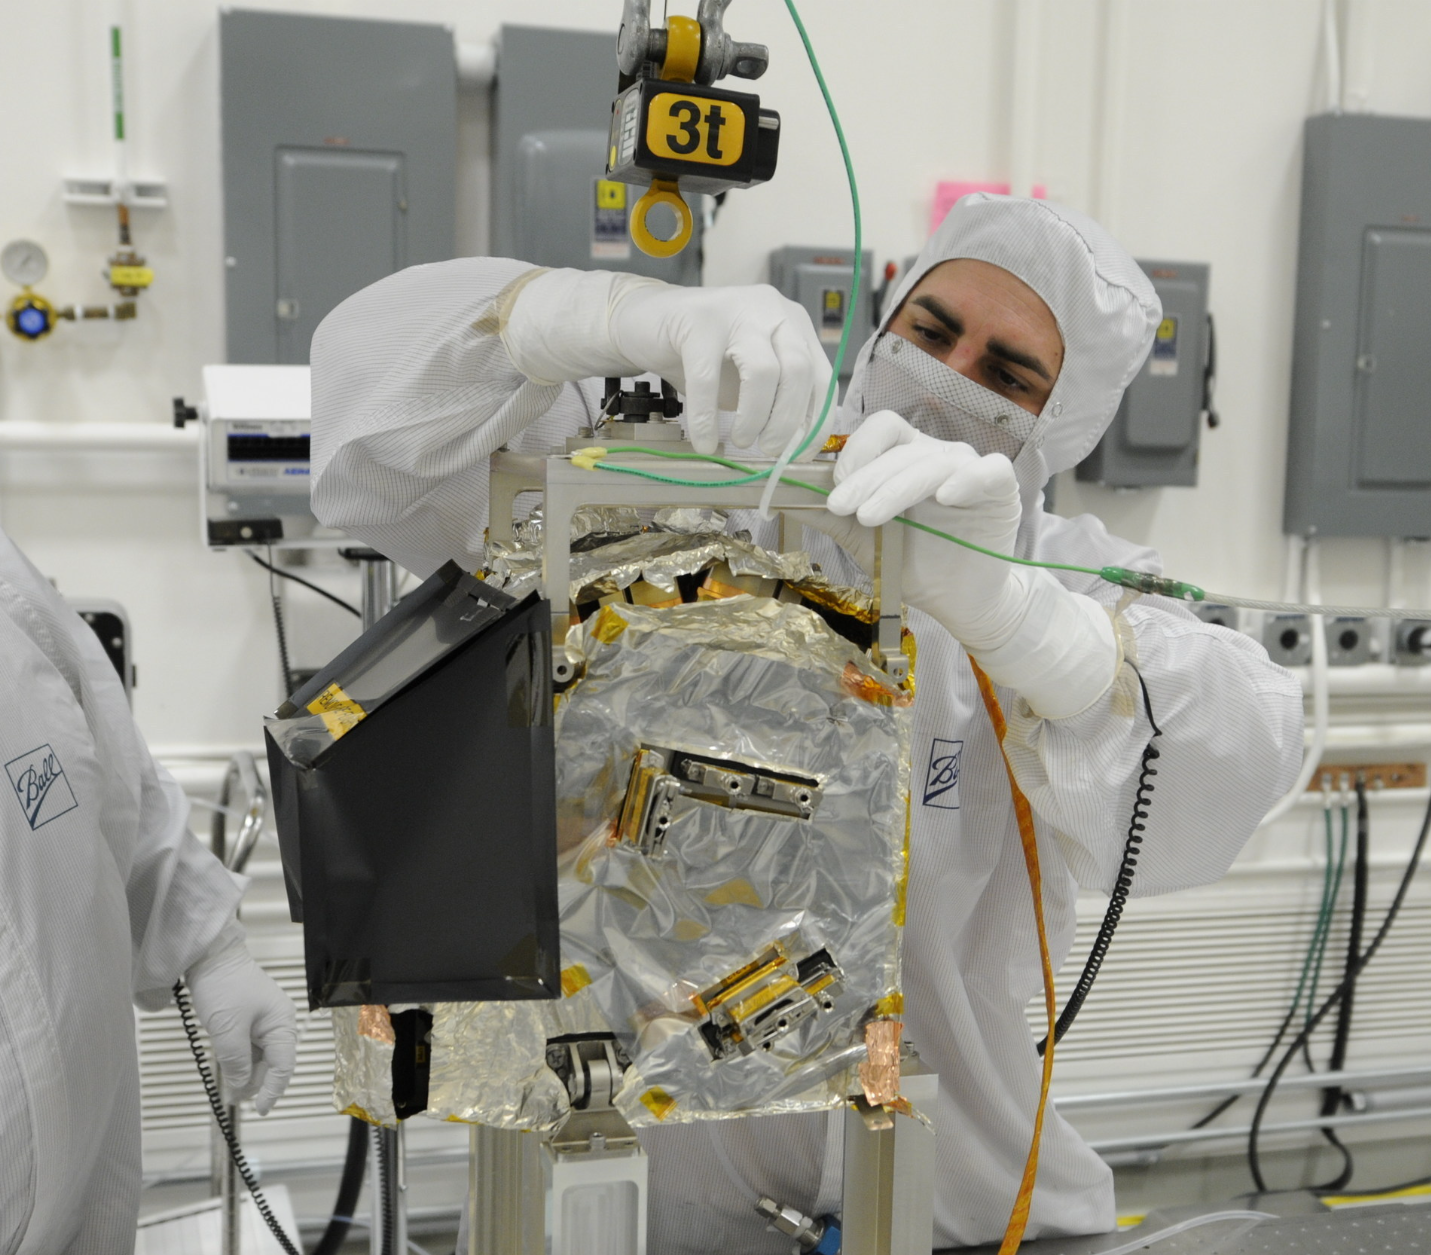 A Ball Aerospace employee works on the JPSS-1/NOAA-20 satellite with a 3-ton wireless Ron 2501 dynamometer